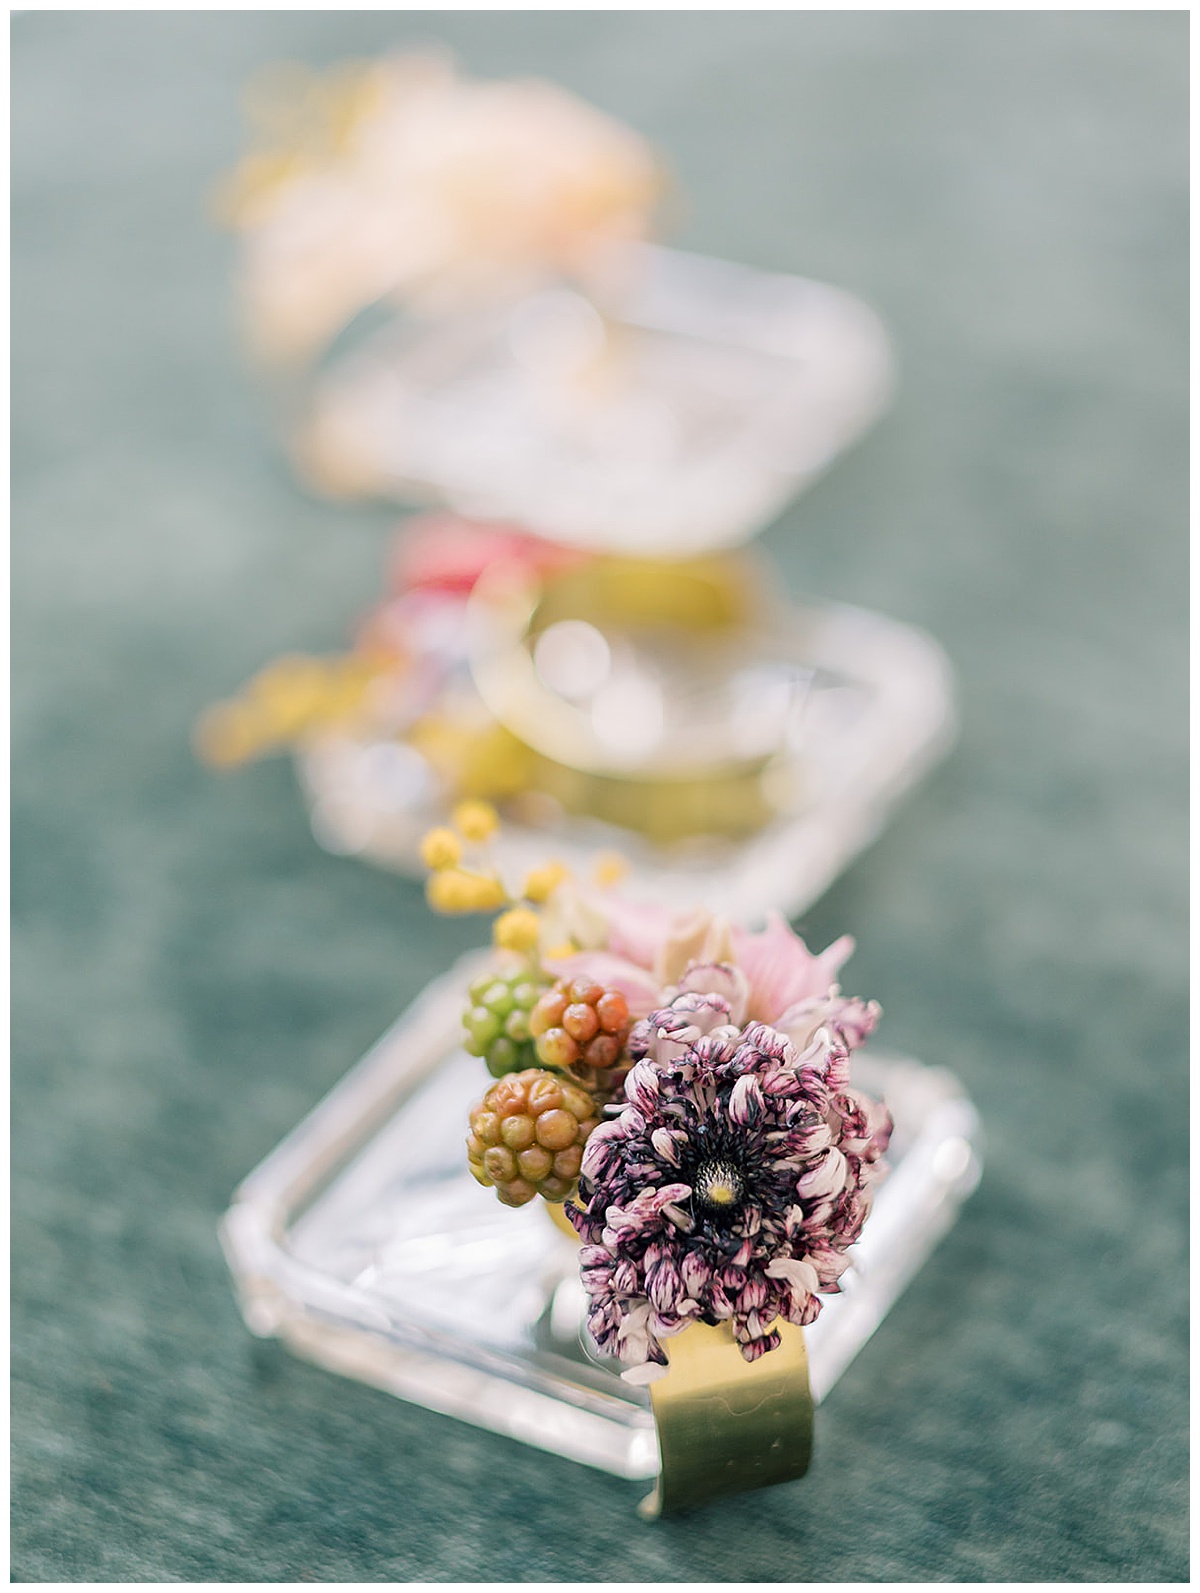 Stunning floral jewelry by Kayla Bouren Photography